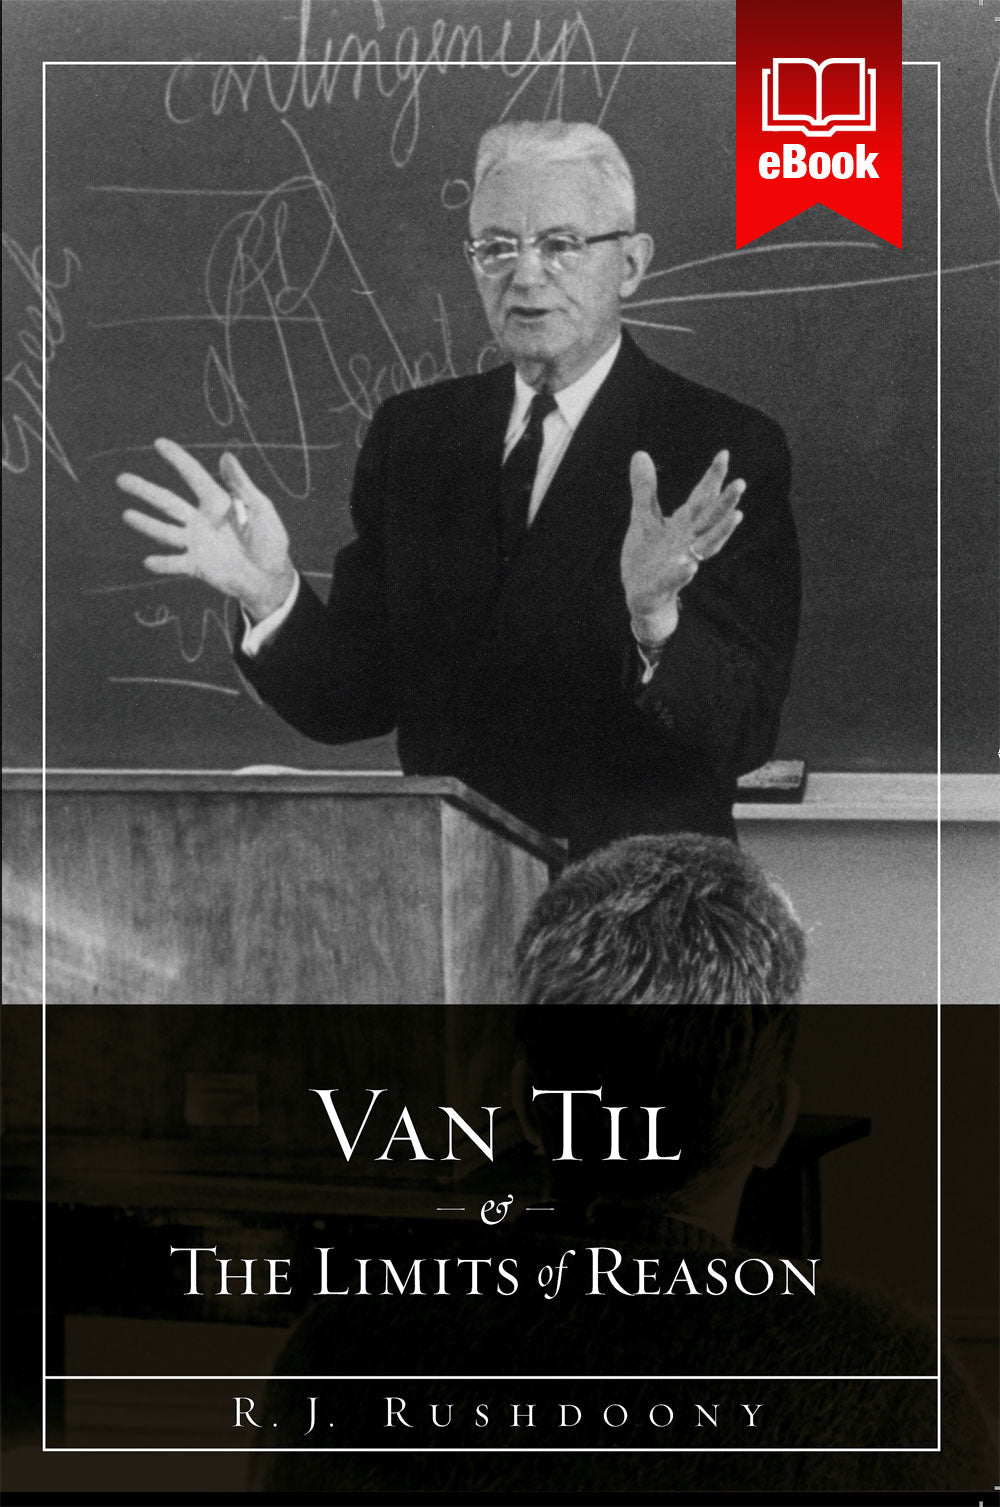 Van Til and the Limits of Reason